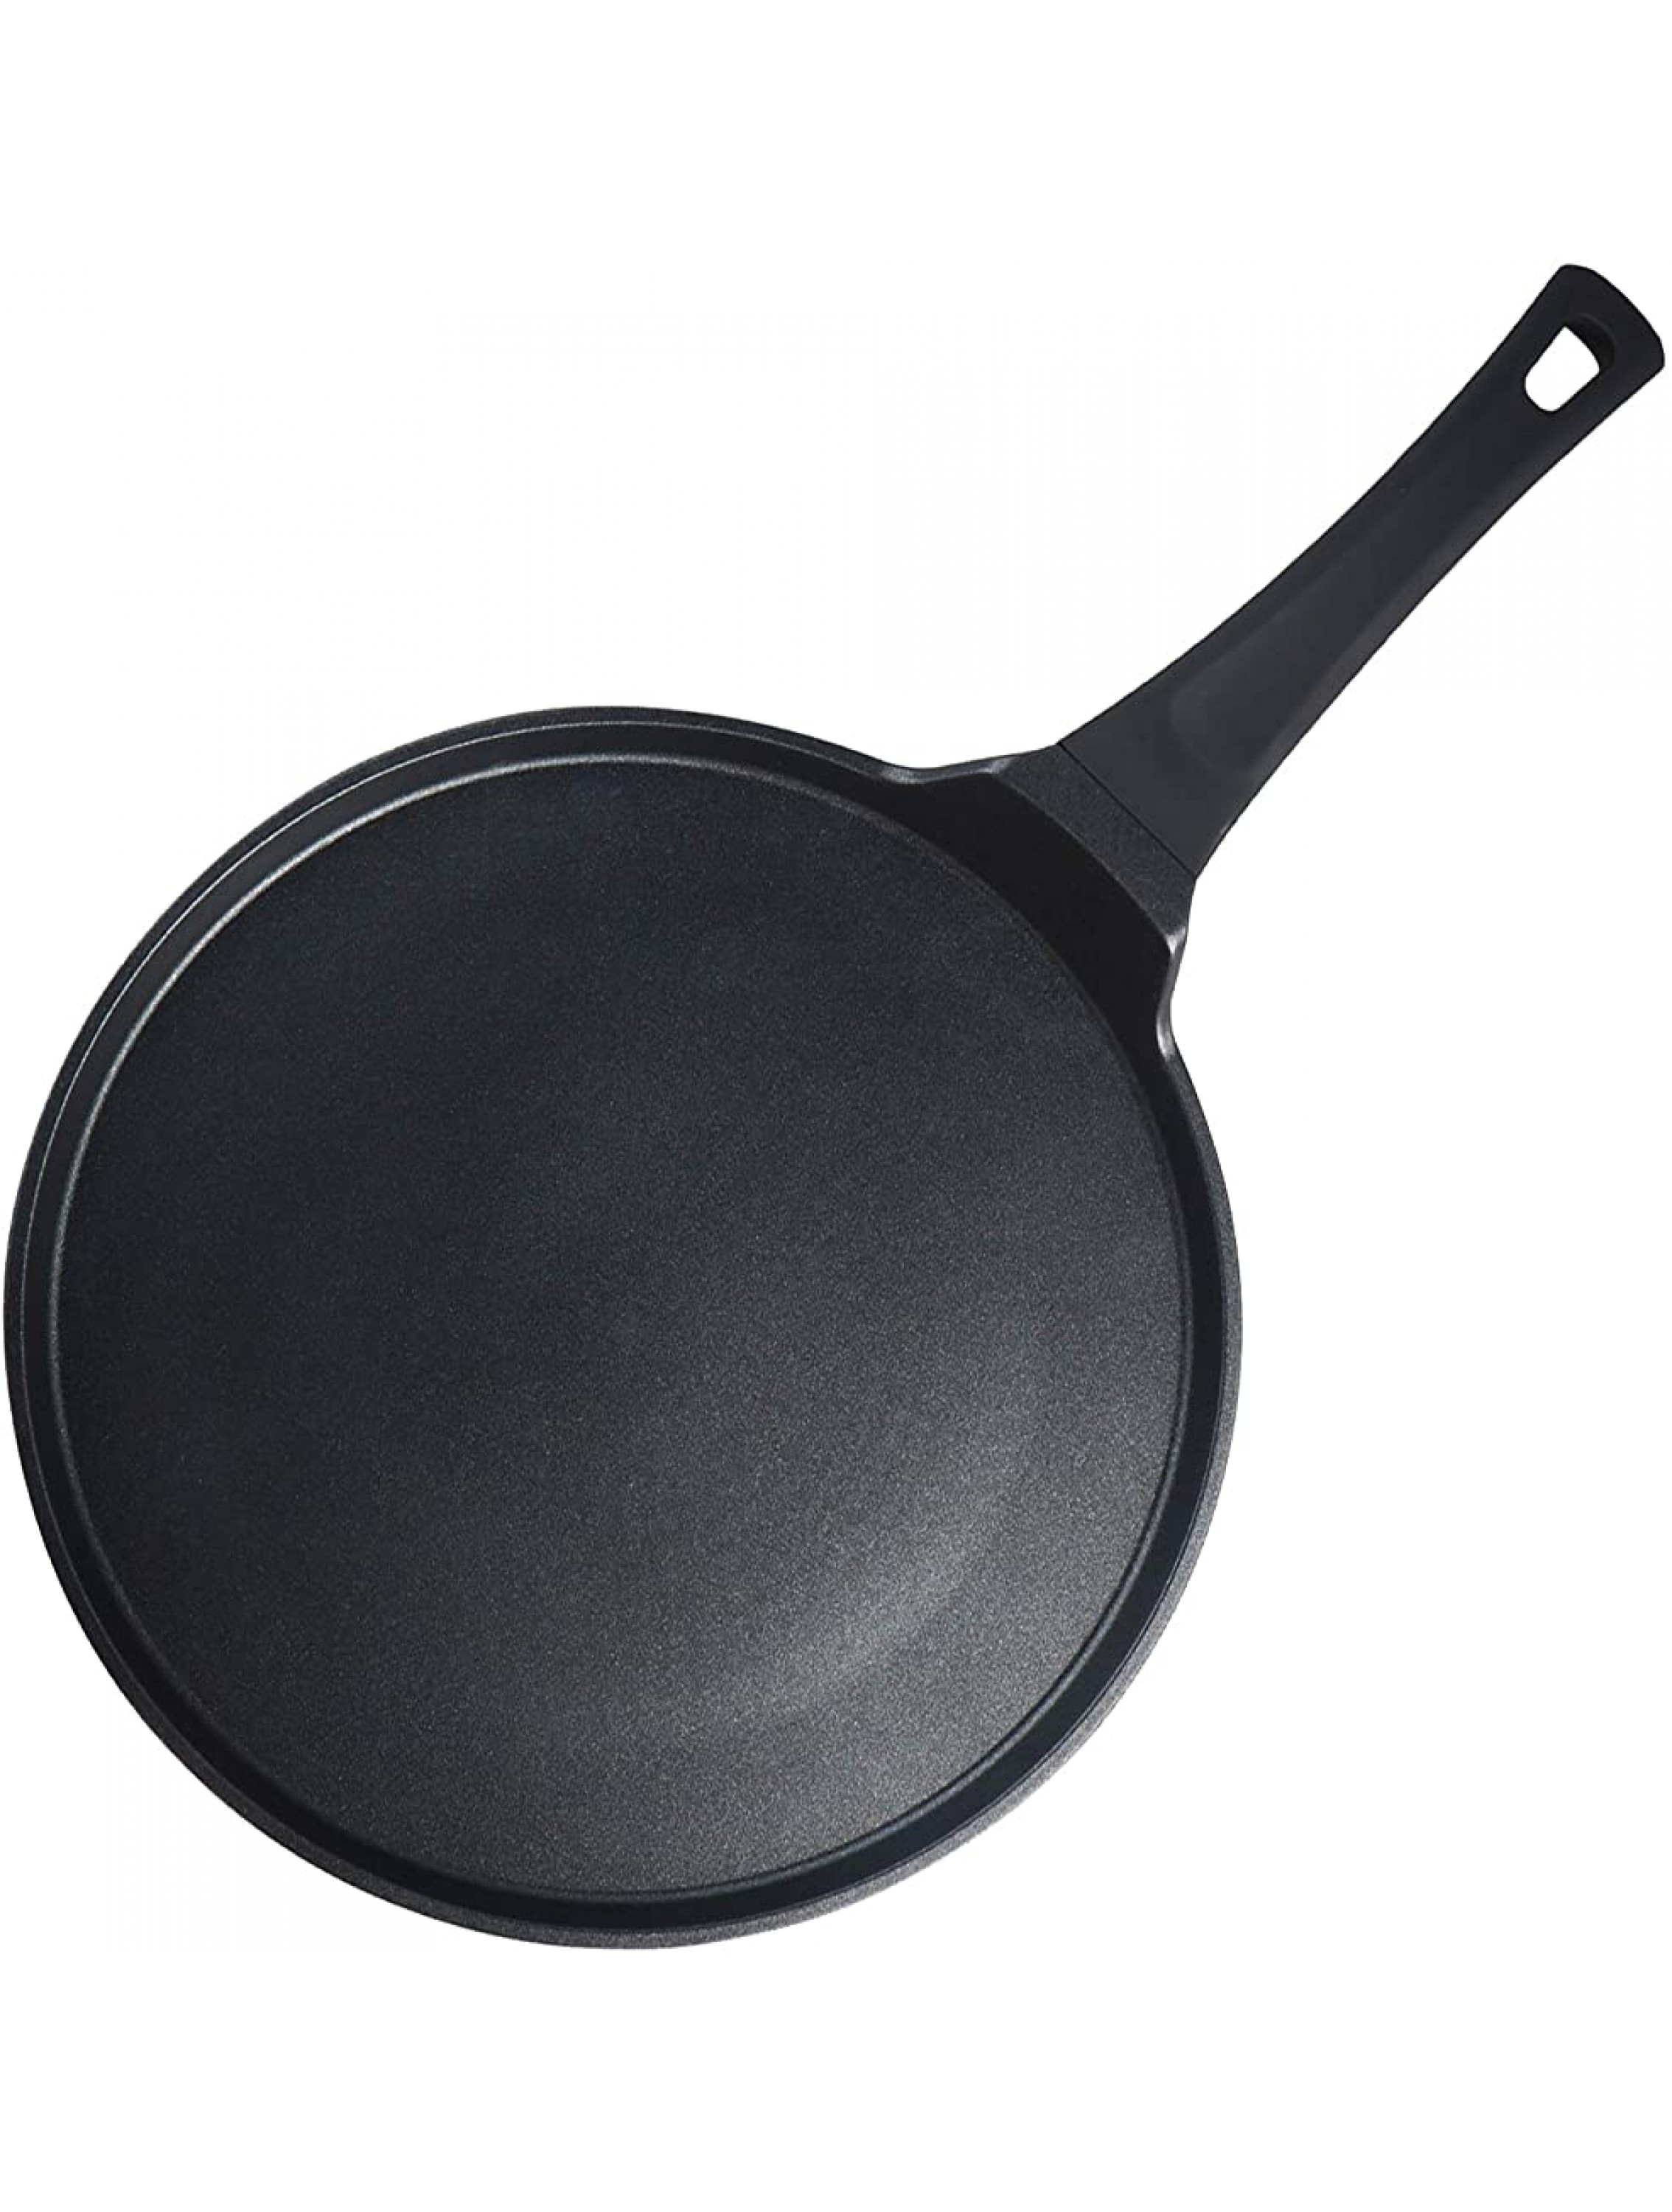 S·KITCHN Crepe Pan Nonstick Dosa Pan Tawa Pan for Roti Indian Non-Stick Pancake Griddle Compatible with Induction Cooktop Comal for Tortillas Griddle Pan for Stove Top 12.5 Inches - B9FJ3VIIT